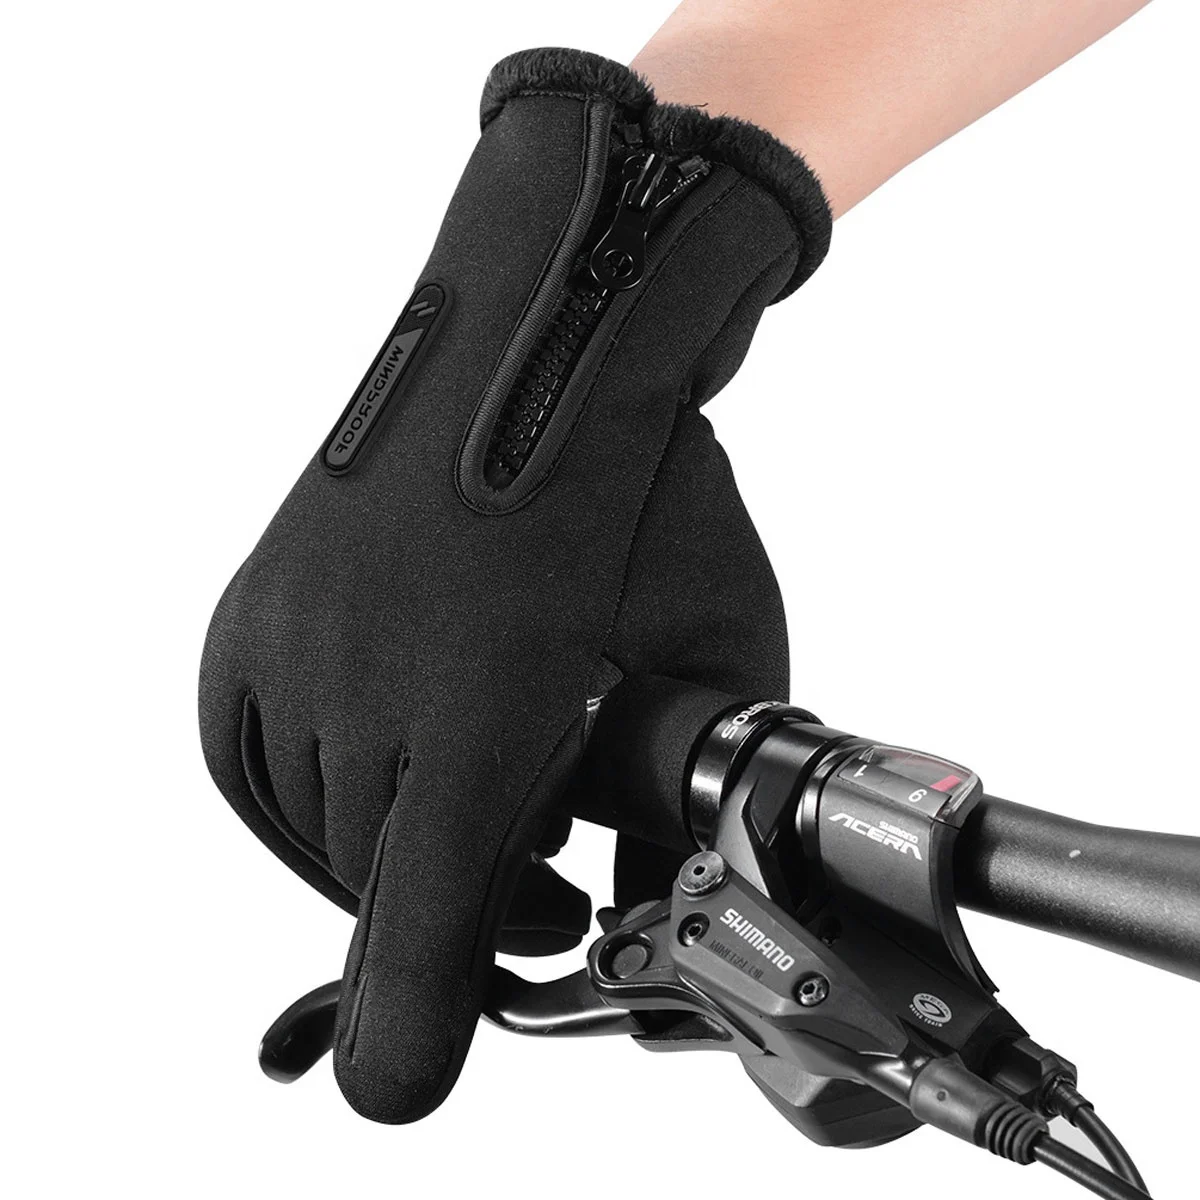 OEM Cycling Gloves Thermal Windproof Touch Screen Gloves Bicycle Motorcycle Skiing Sports Gloves